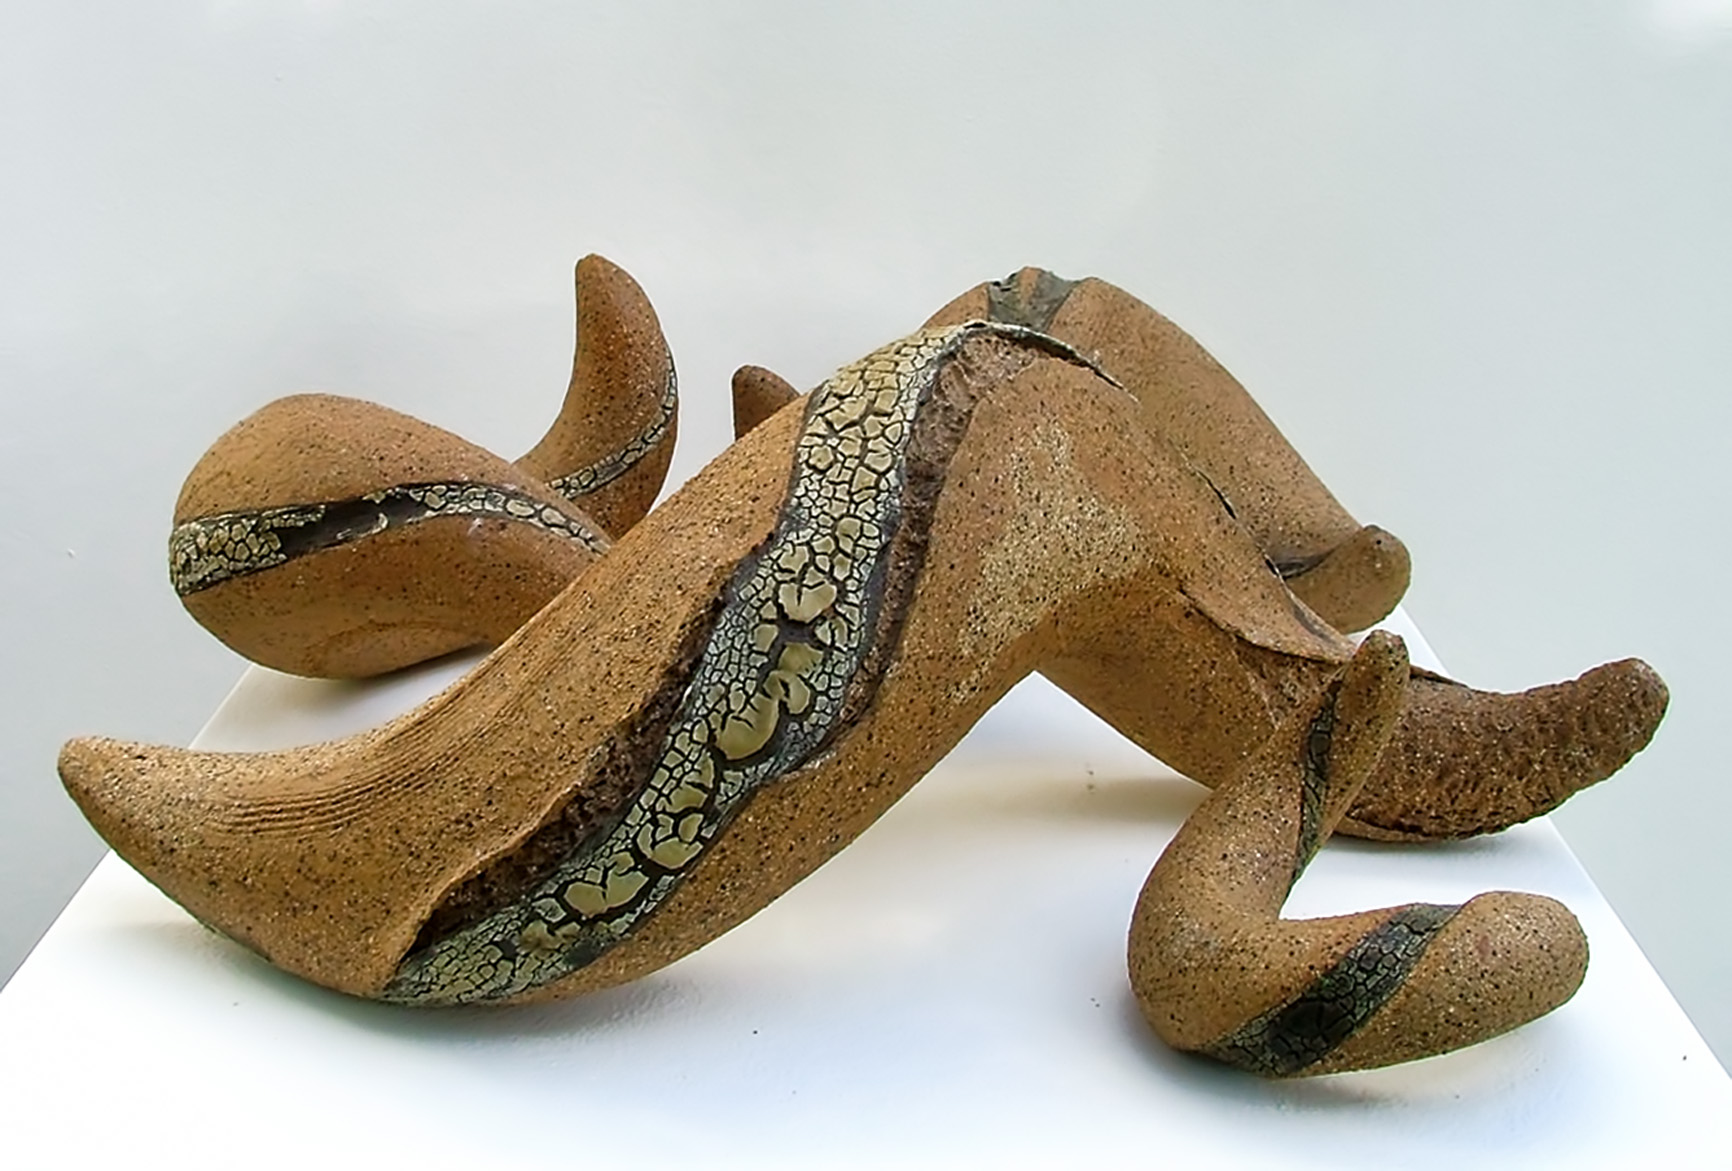 Several curvacious twisting sculptures with interesting cracked glazes